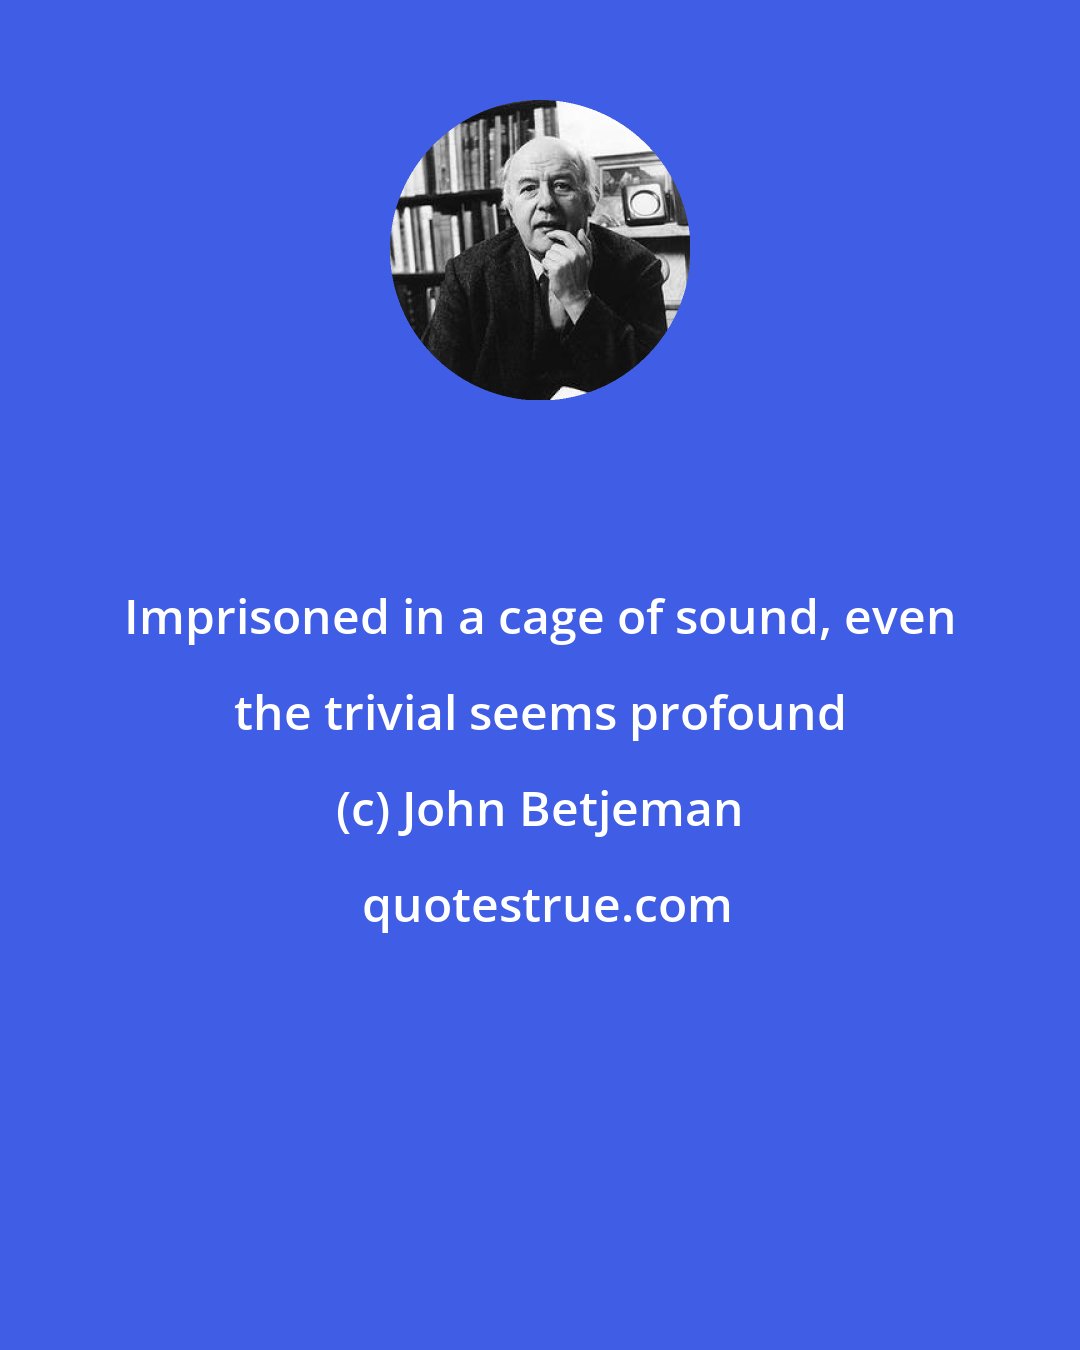 John Betjeman: Imprisoned in a cage of sound, even the trivial seems profound